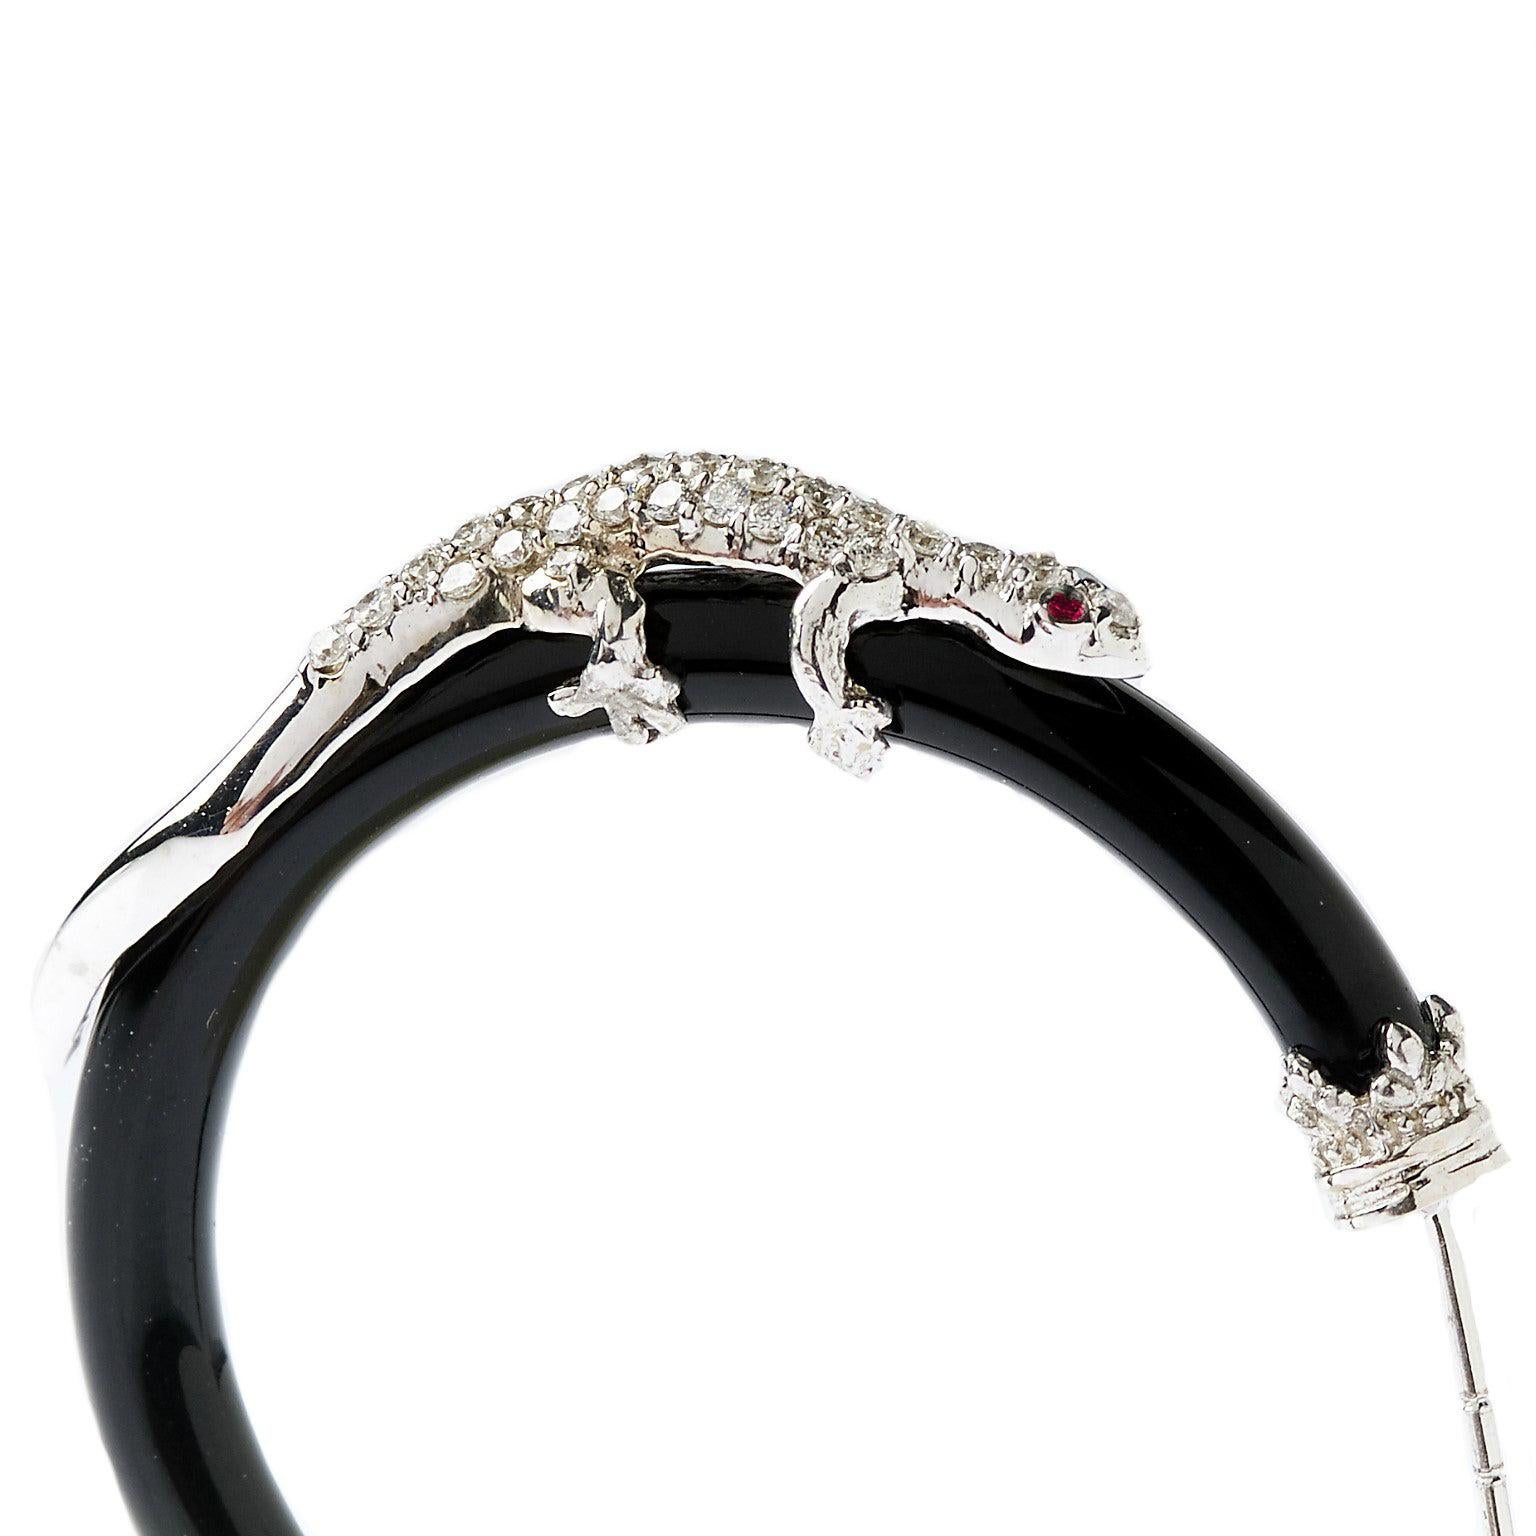 IF YOU ARE REALLY INTERESTED, CONTACT US WITH ANY REASONABLE OFFER. WE WILL TRY OUR BEST TO MAKE YOU HAPPY!

18K White Gold and Diamond Lizard Hoop Earrings with Onyx by Stambolian

These stunning earrings feature two lizards that sit ontop of Onyx